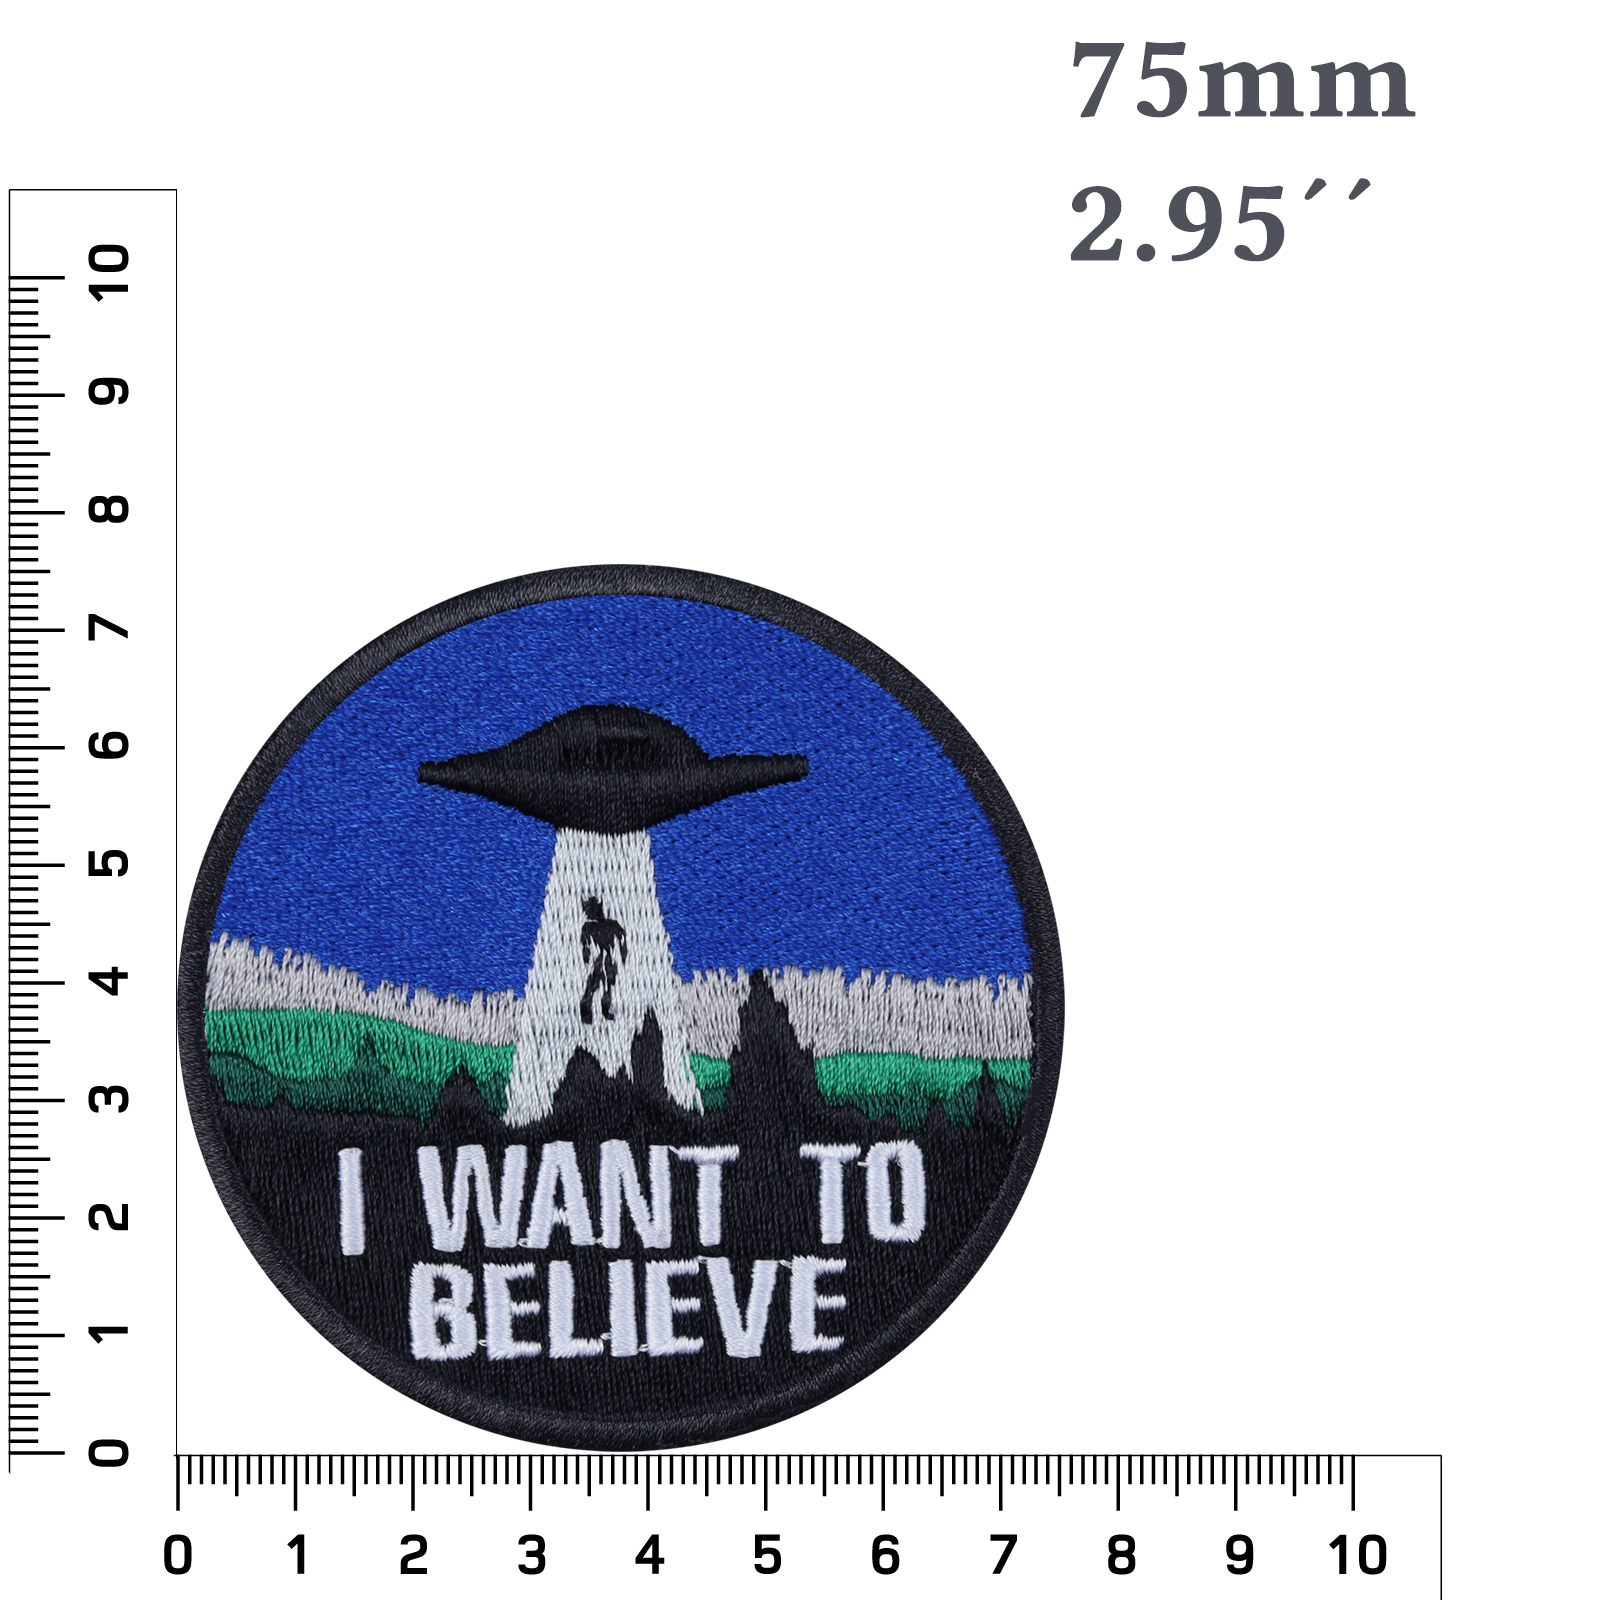 I want to believe - Patch